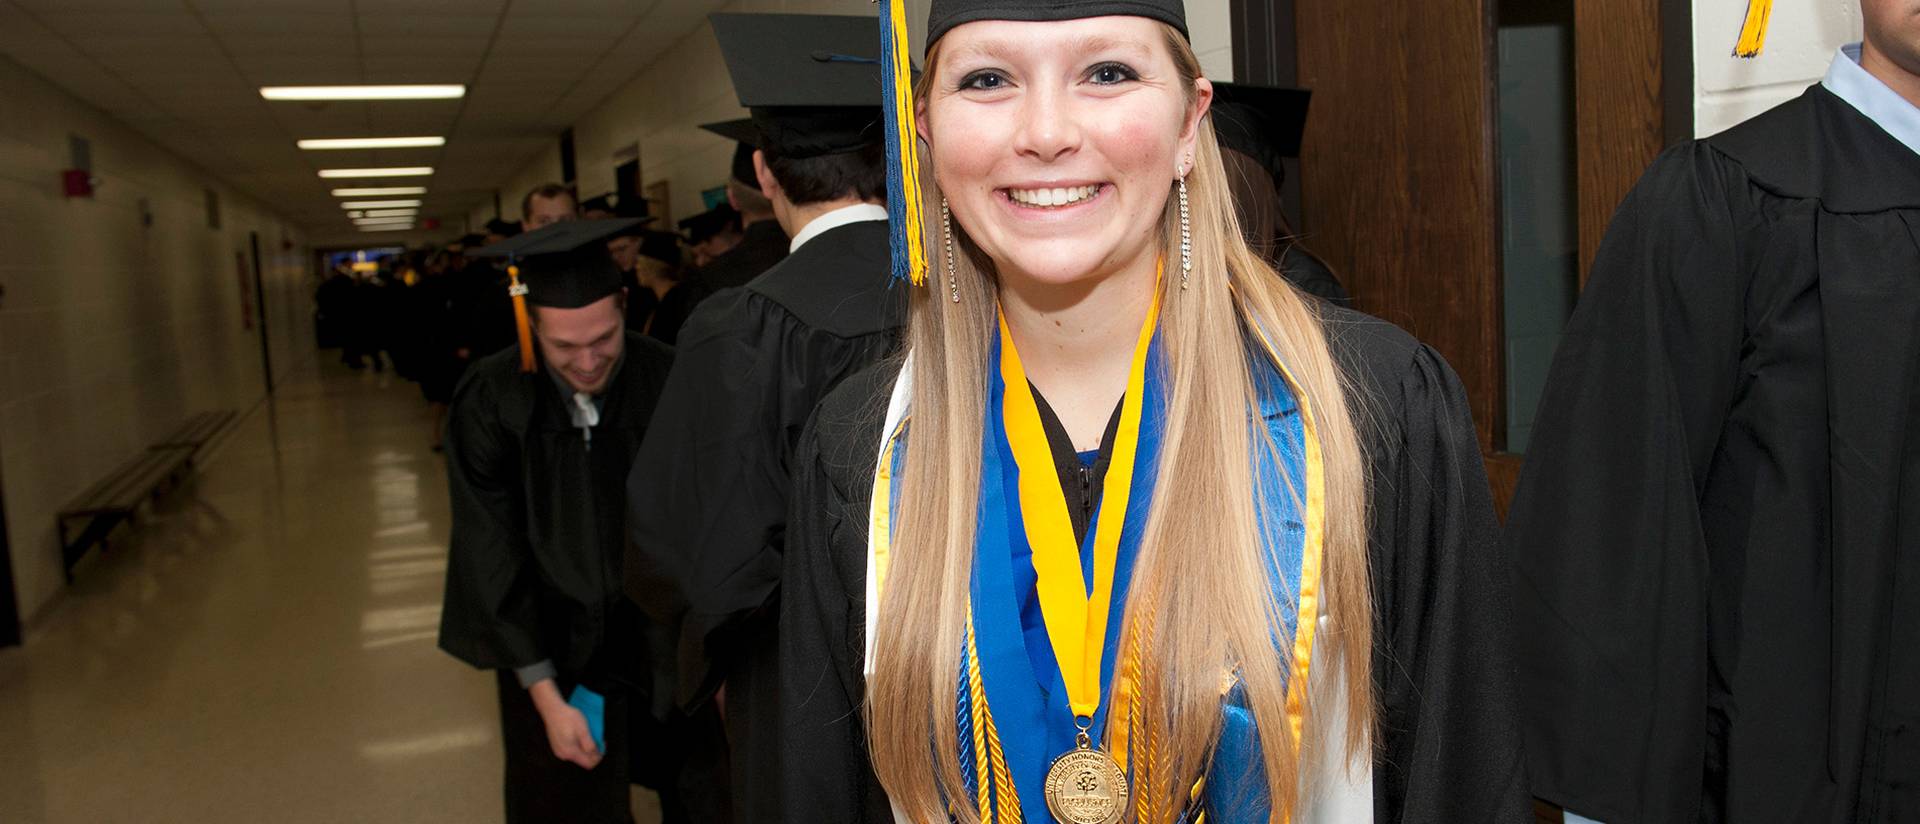 Katelyn Goettl makes history as the first triple honor grad at UW-Eau Claire